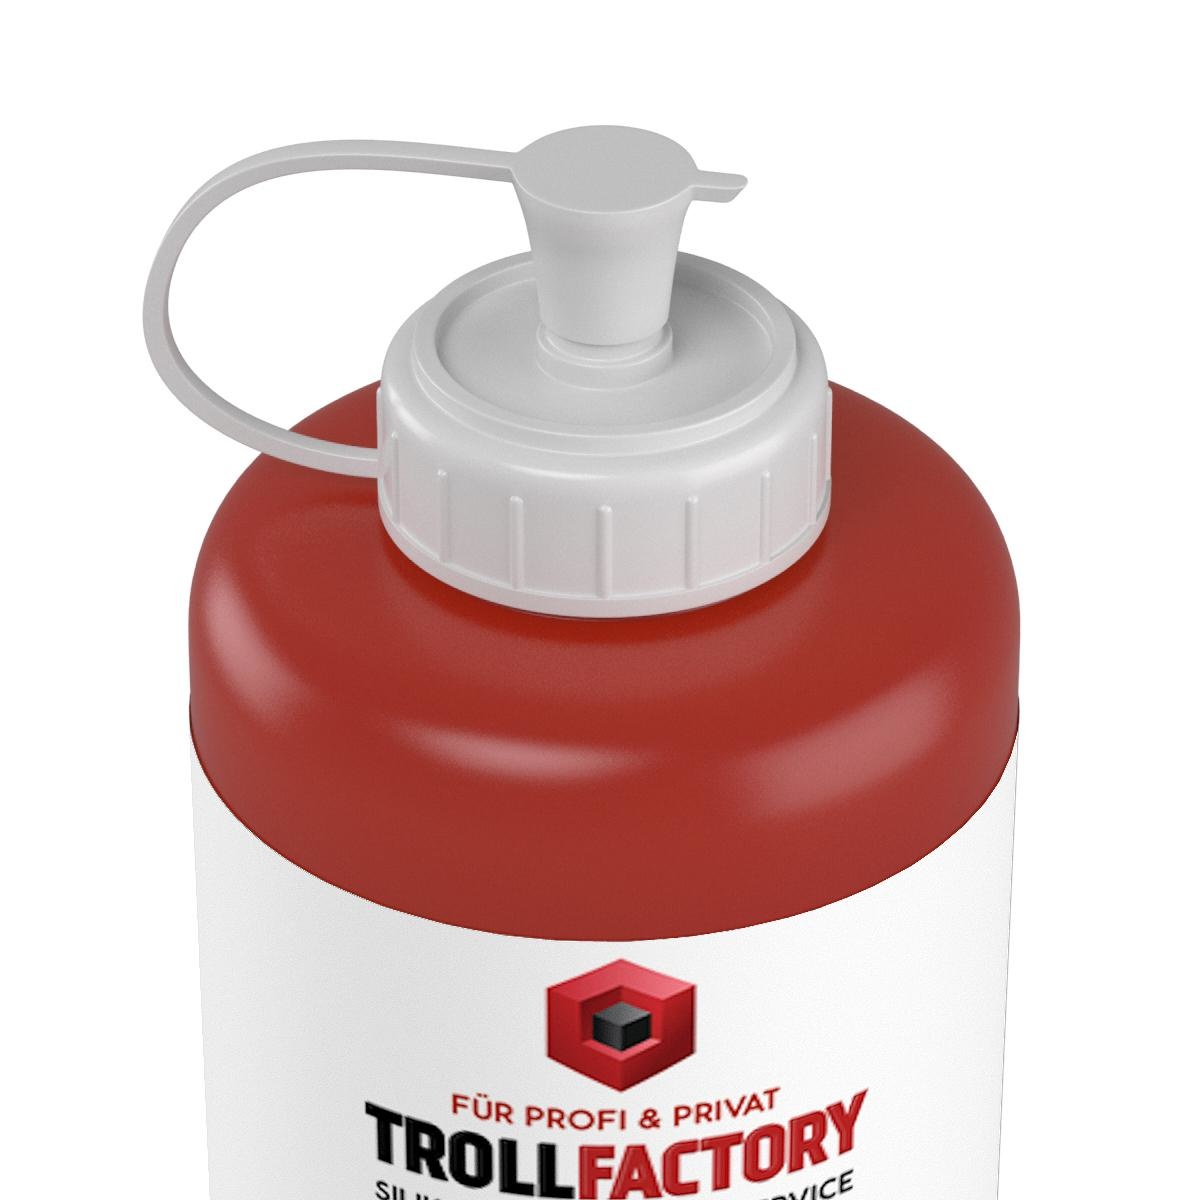 Troll Factory TFC Troll Factory Silicone Rubber Type 3 HB pewter heat resistant 2000g